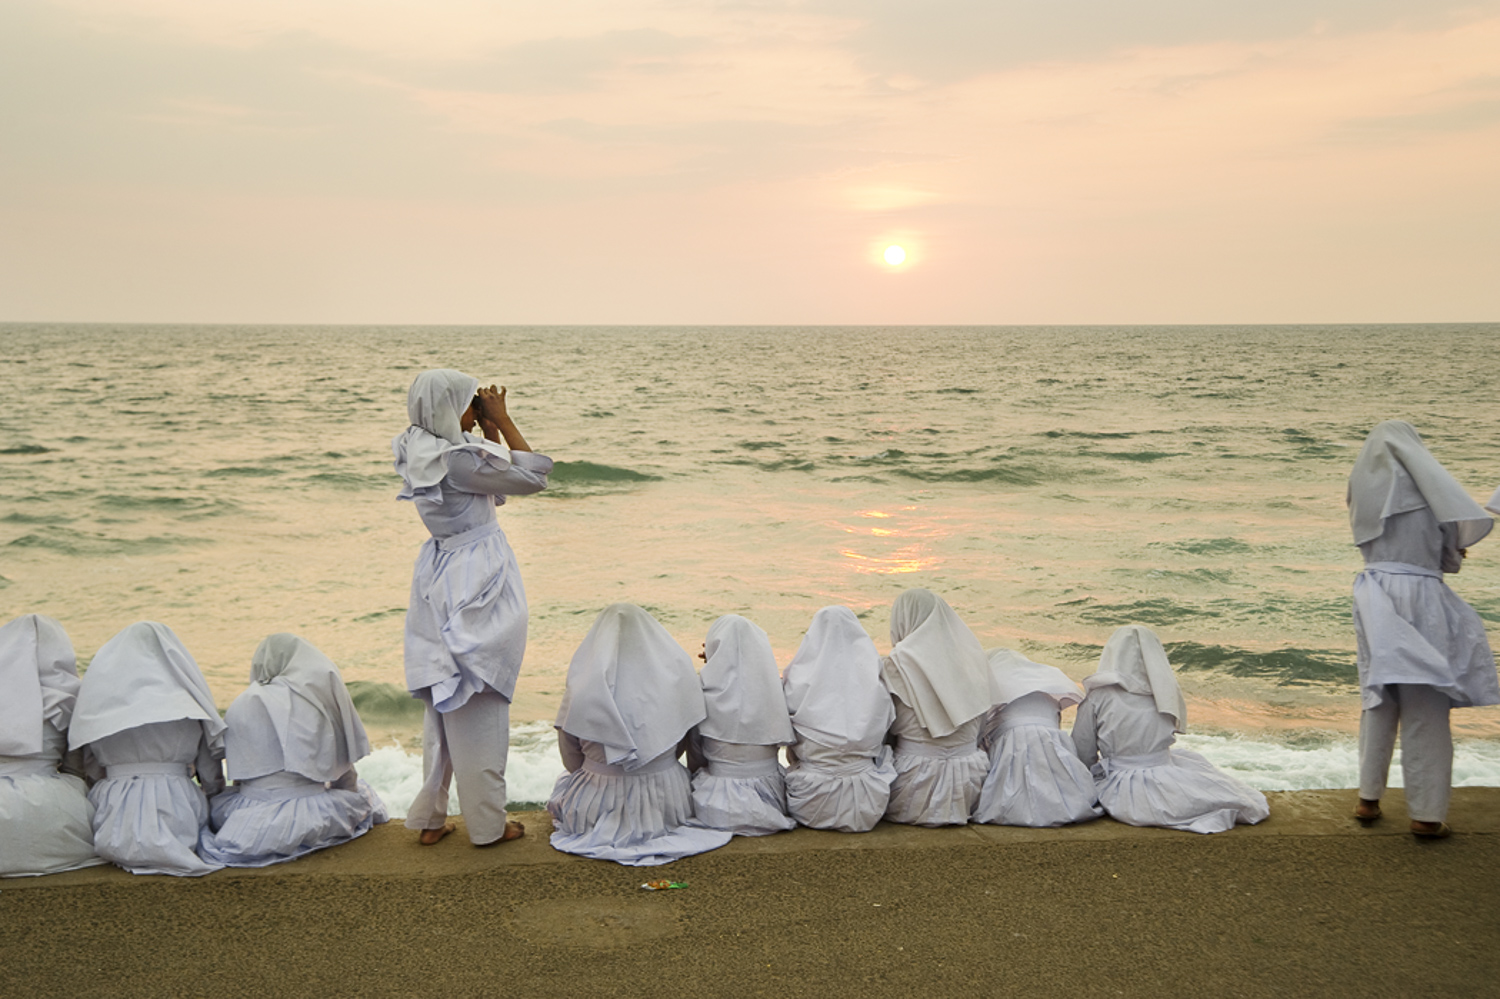  Schoolgirls in Colombo take in a sunset, looking across the Palk strait to India. 